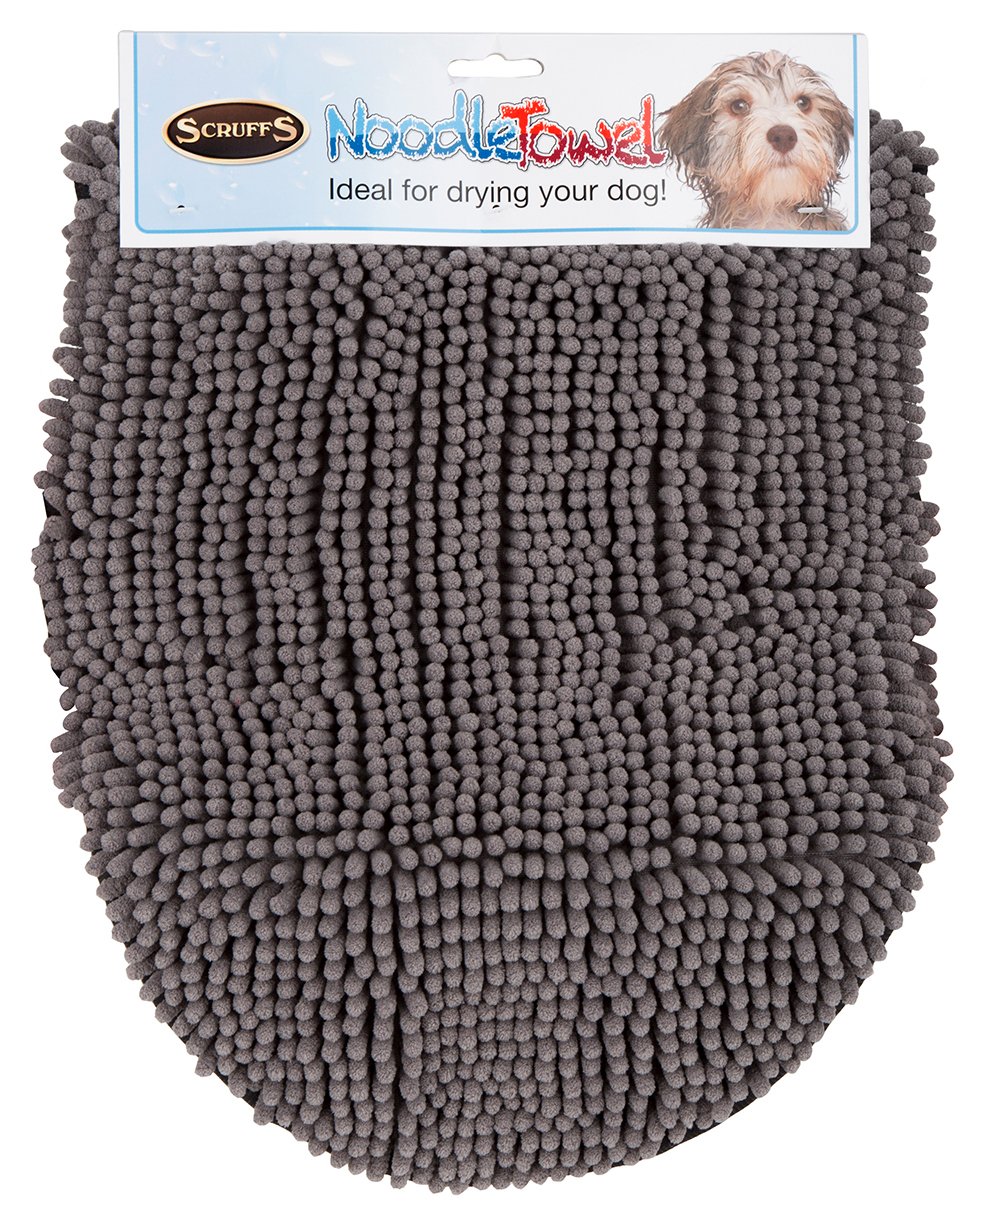 Scruffs Noodle Grey Dog And Cat Drying Towel 